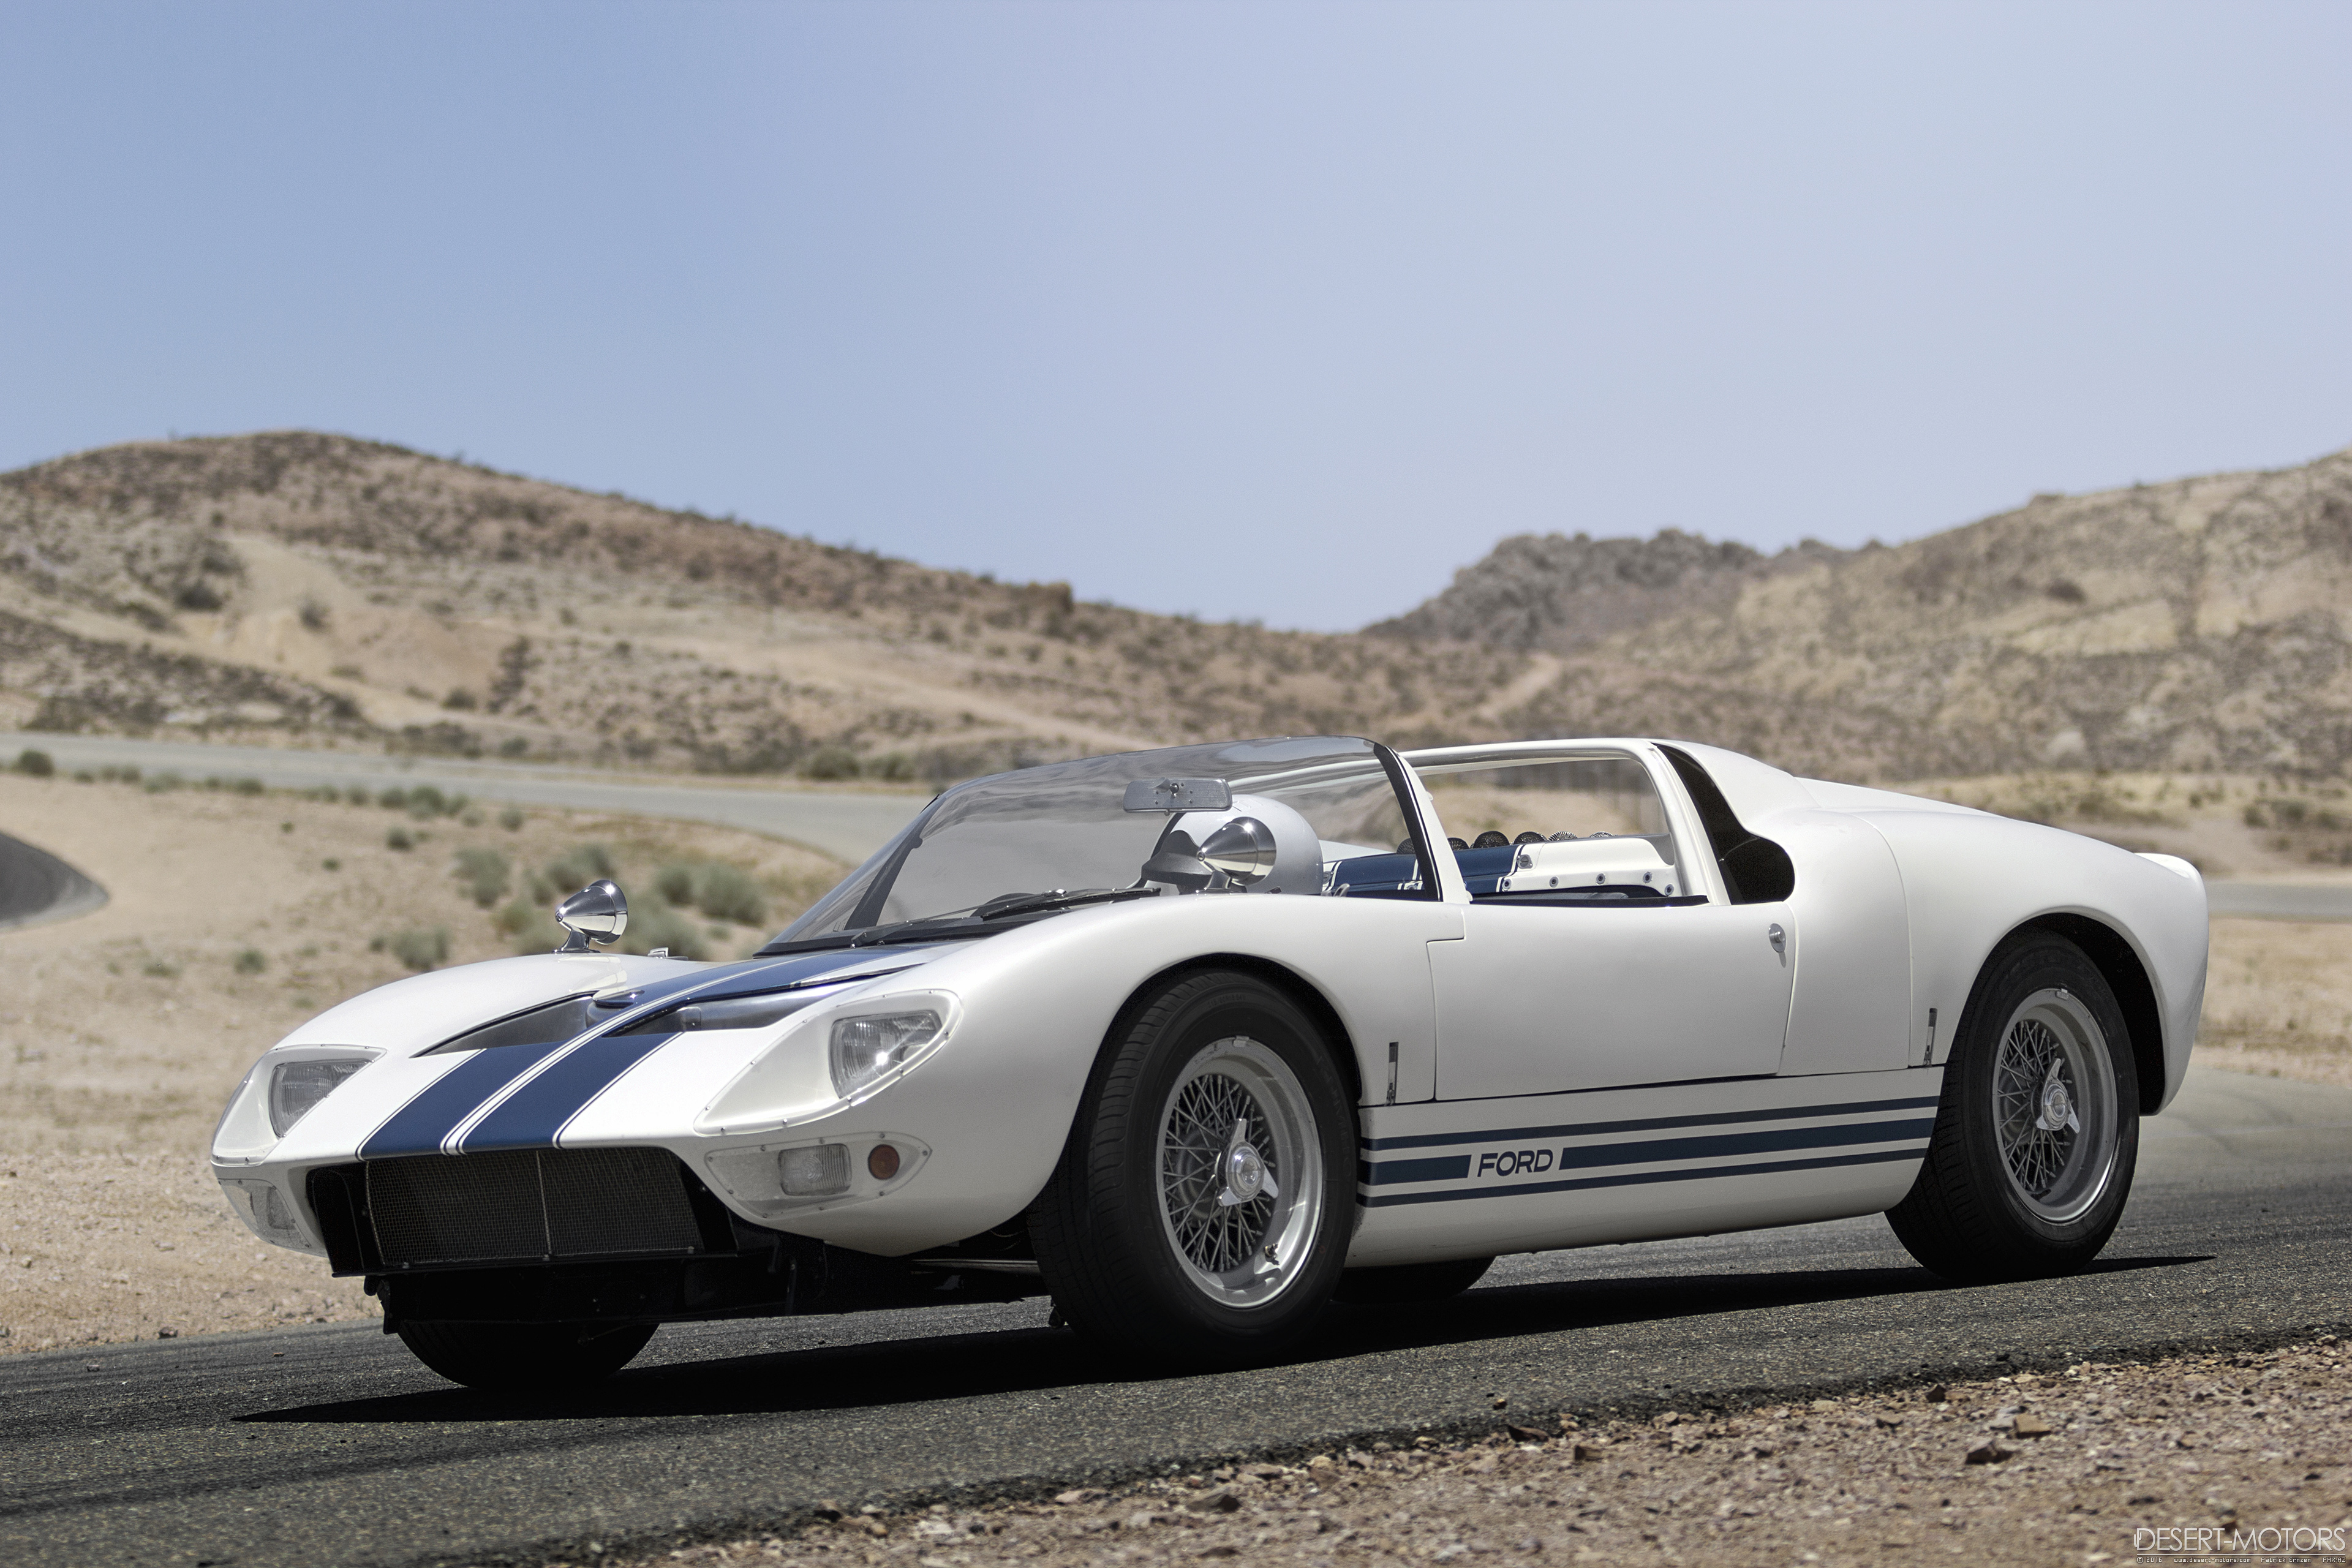 General 3840x2560 Ford GT40 prototypes white cars race cars classic car racing stripes Raceway race tracks desert American cars